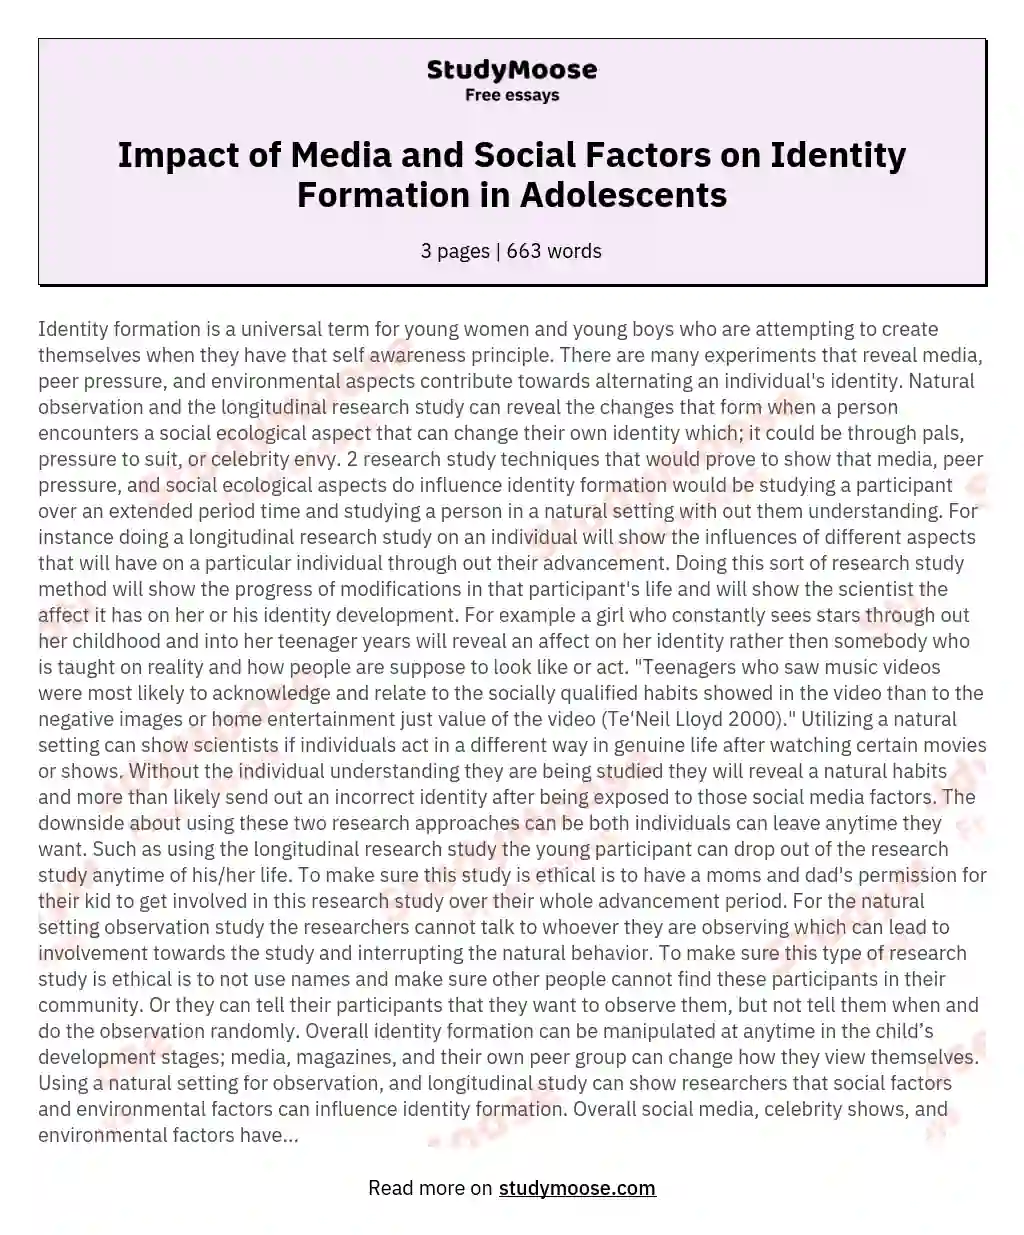 Impact of Media and Social Factors on Identity Formation in Adolescents essay